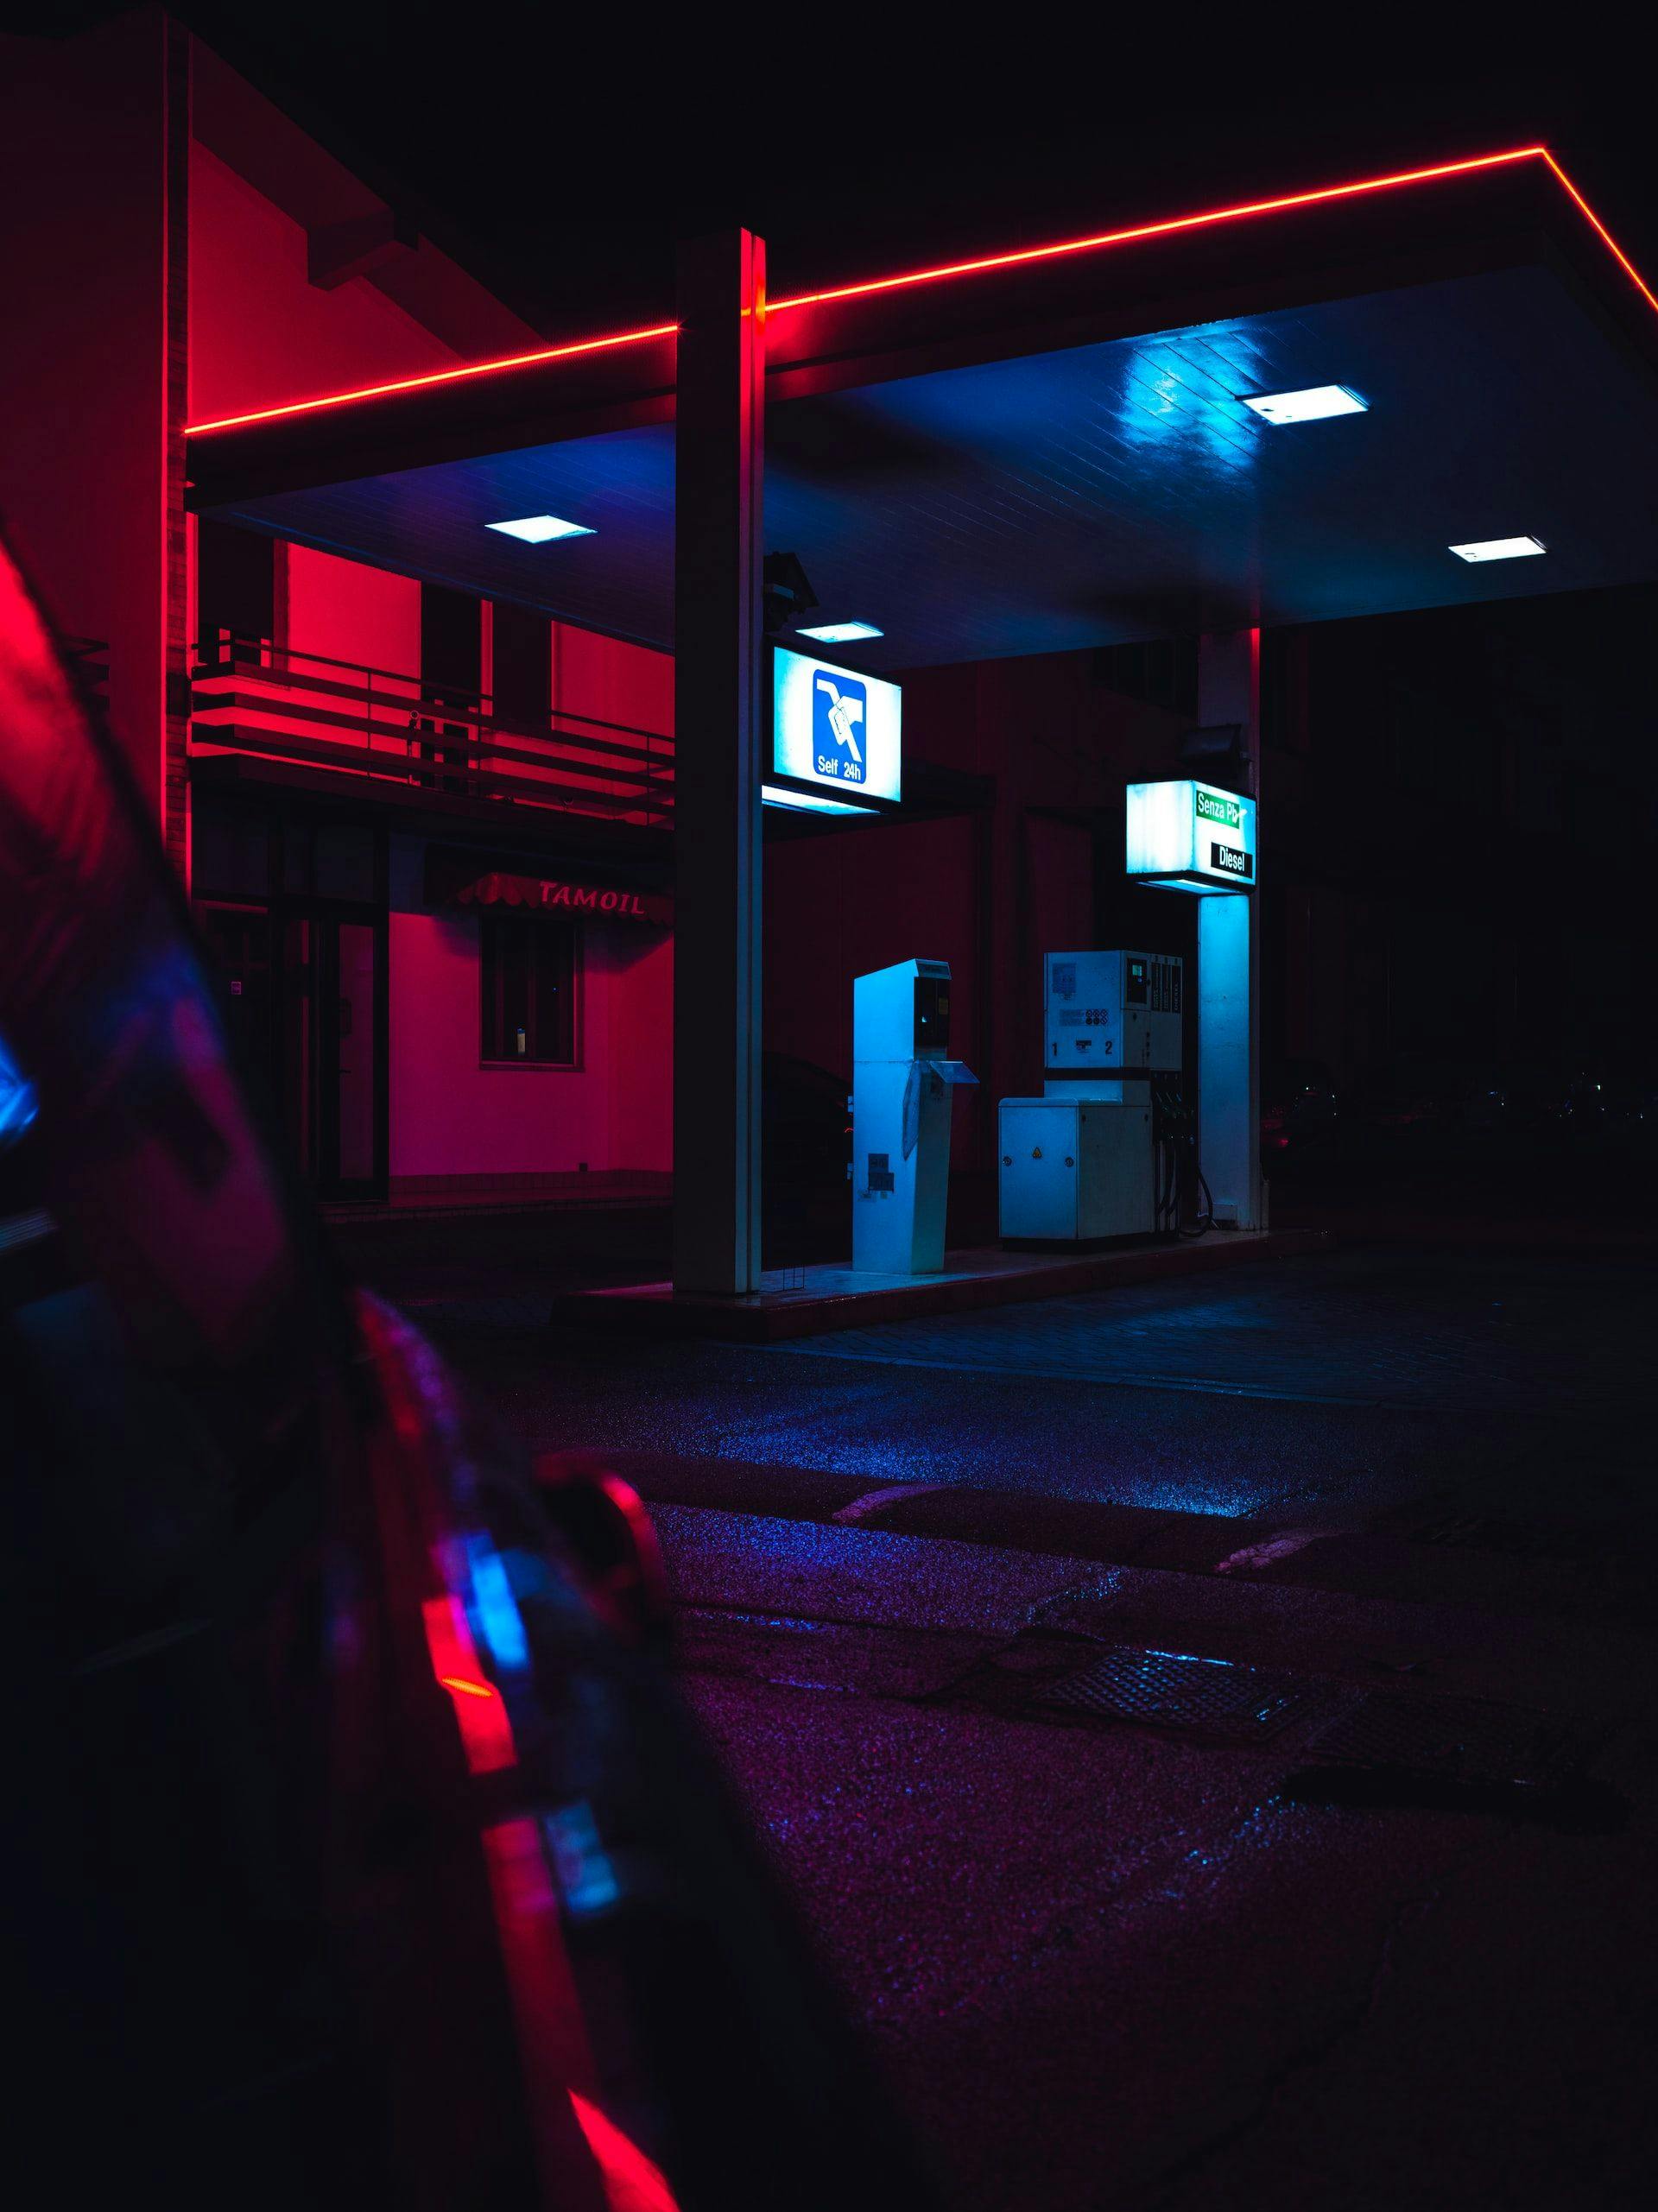 Gas station at night lit by neon sign